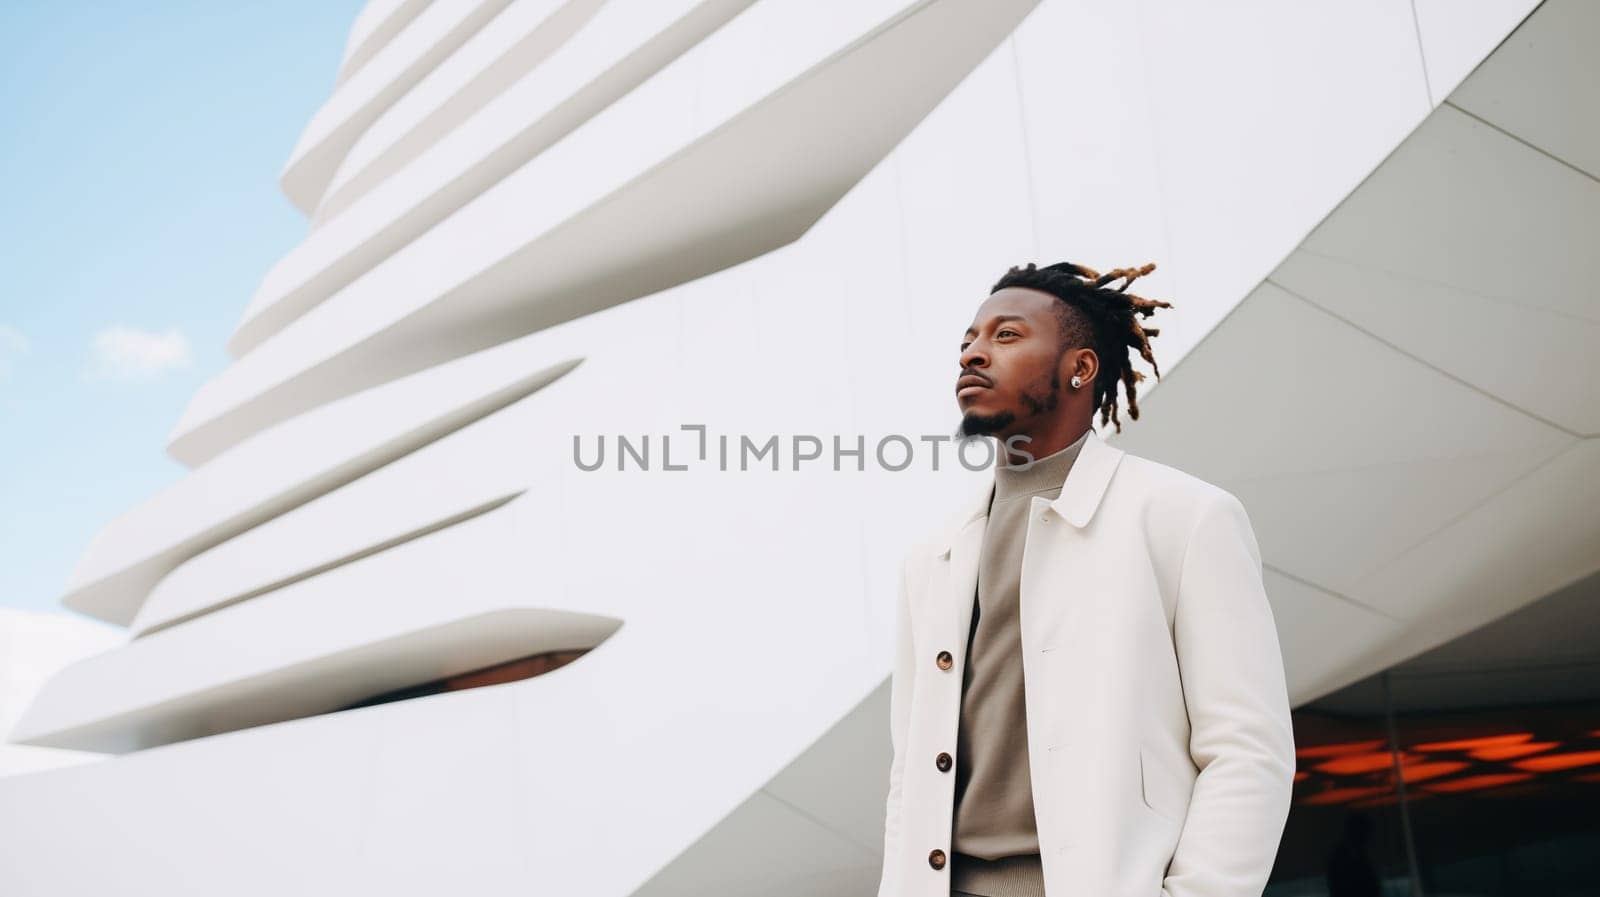 Fashion concept of confident stylish black man in business suit looking away against white minimalism design architecture of a modern art museum building